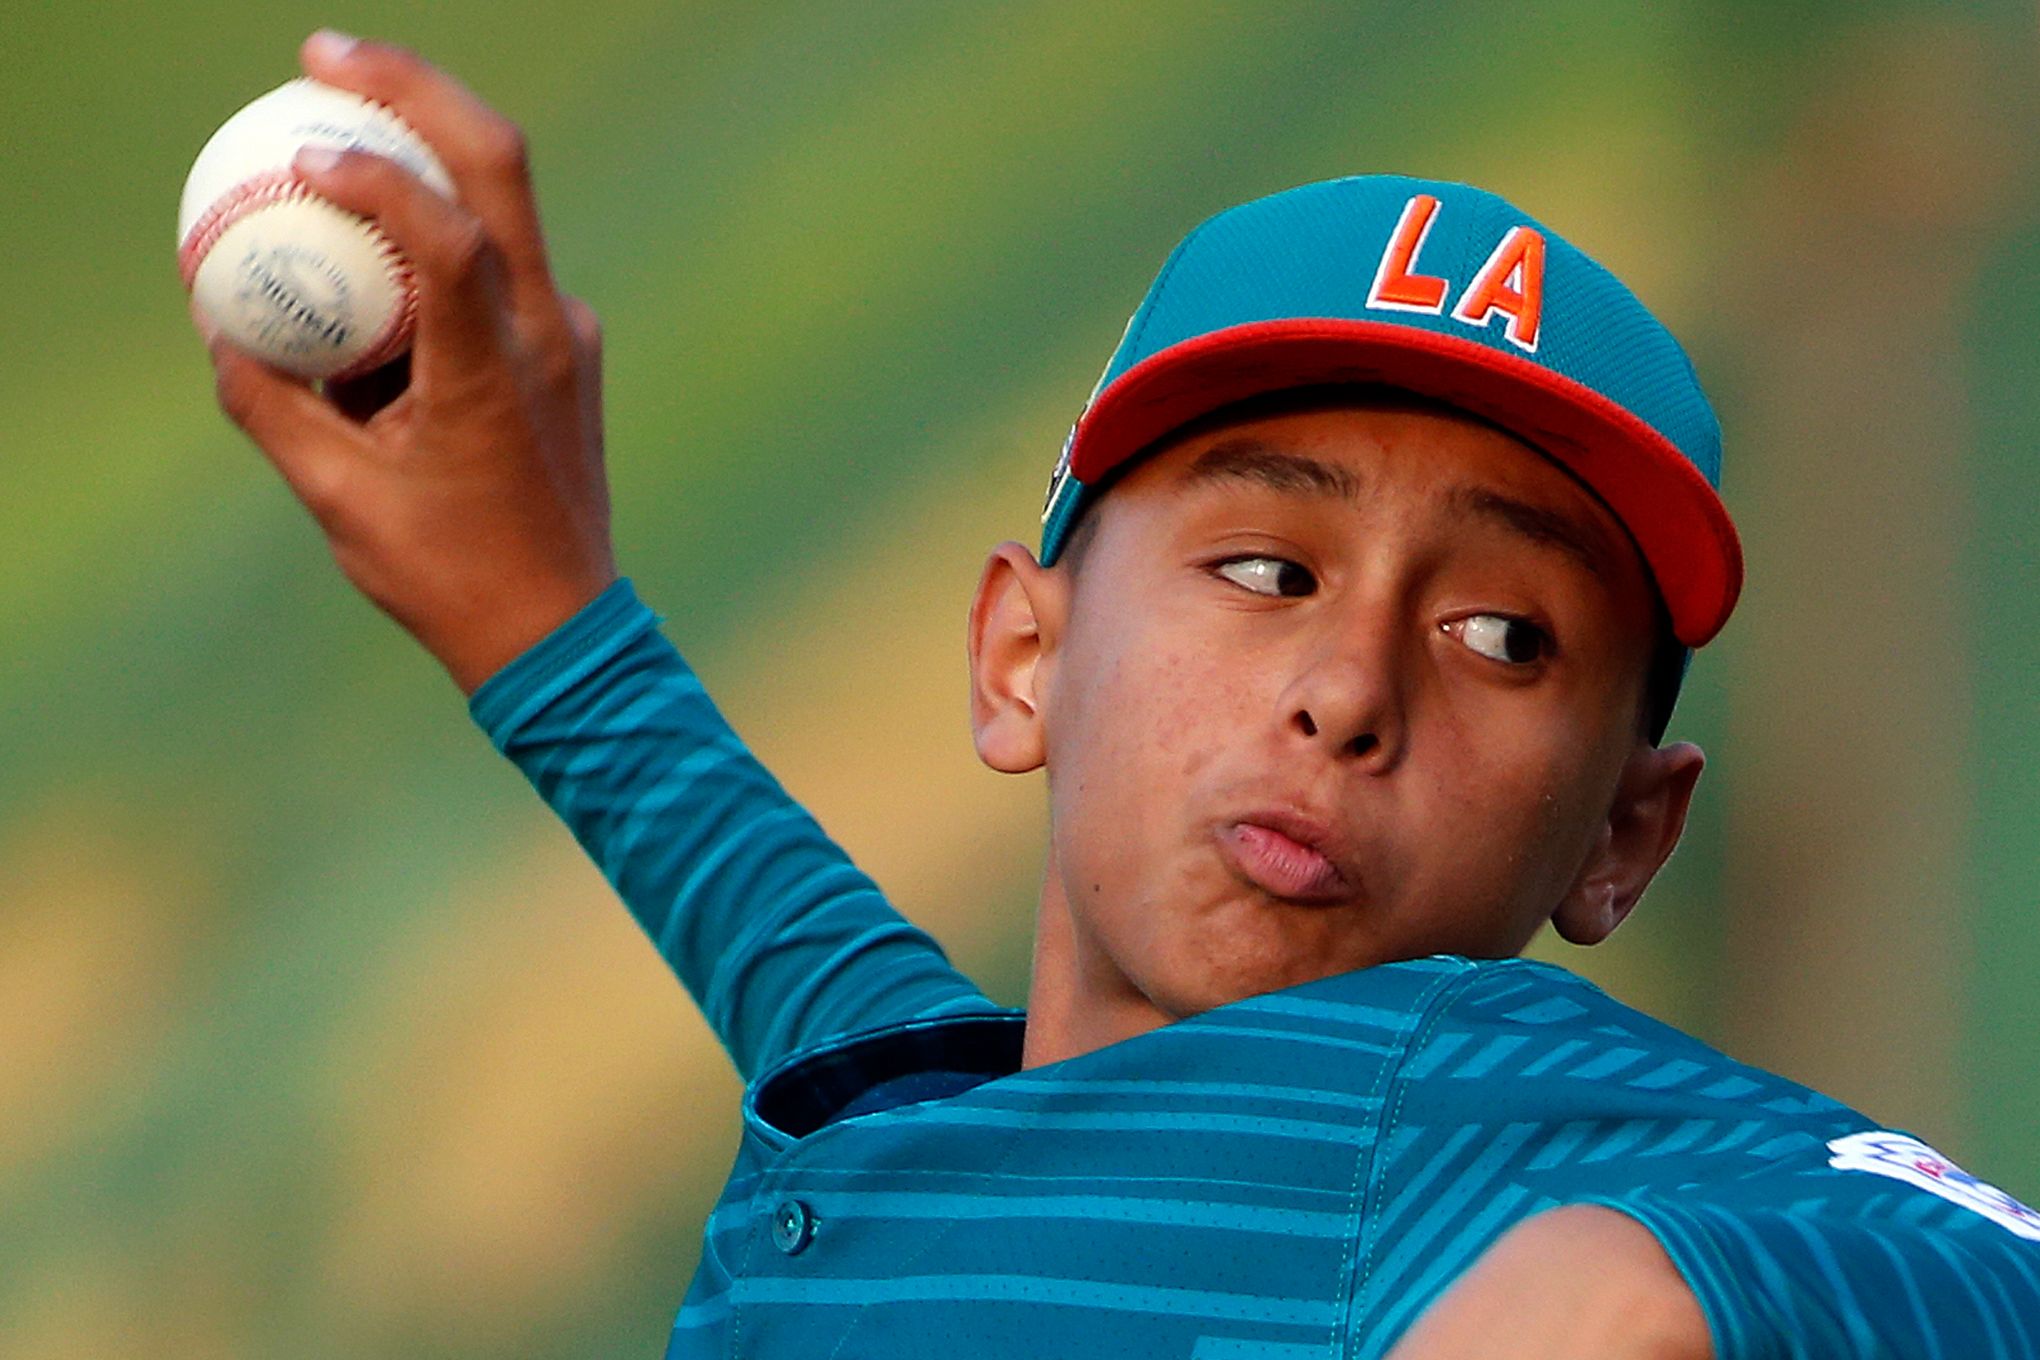 Venezuela player pitches in Little League World Series hours after getting  visa to come to U.S. 